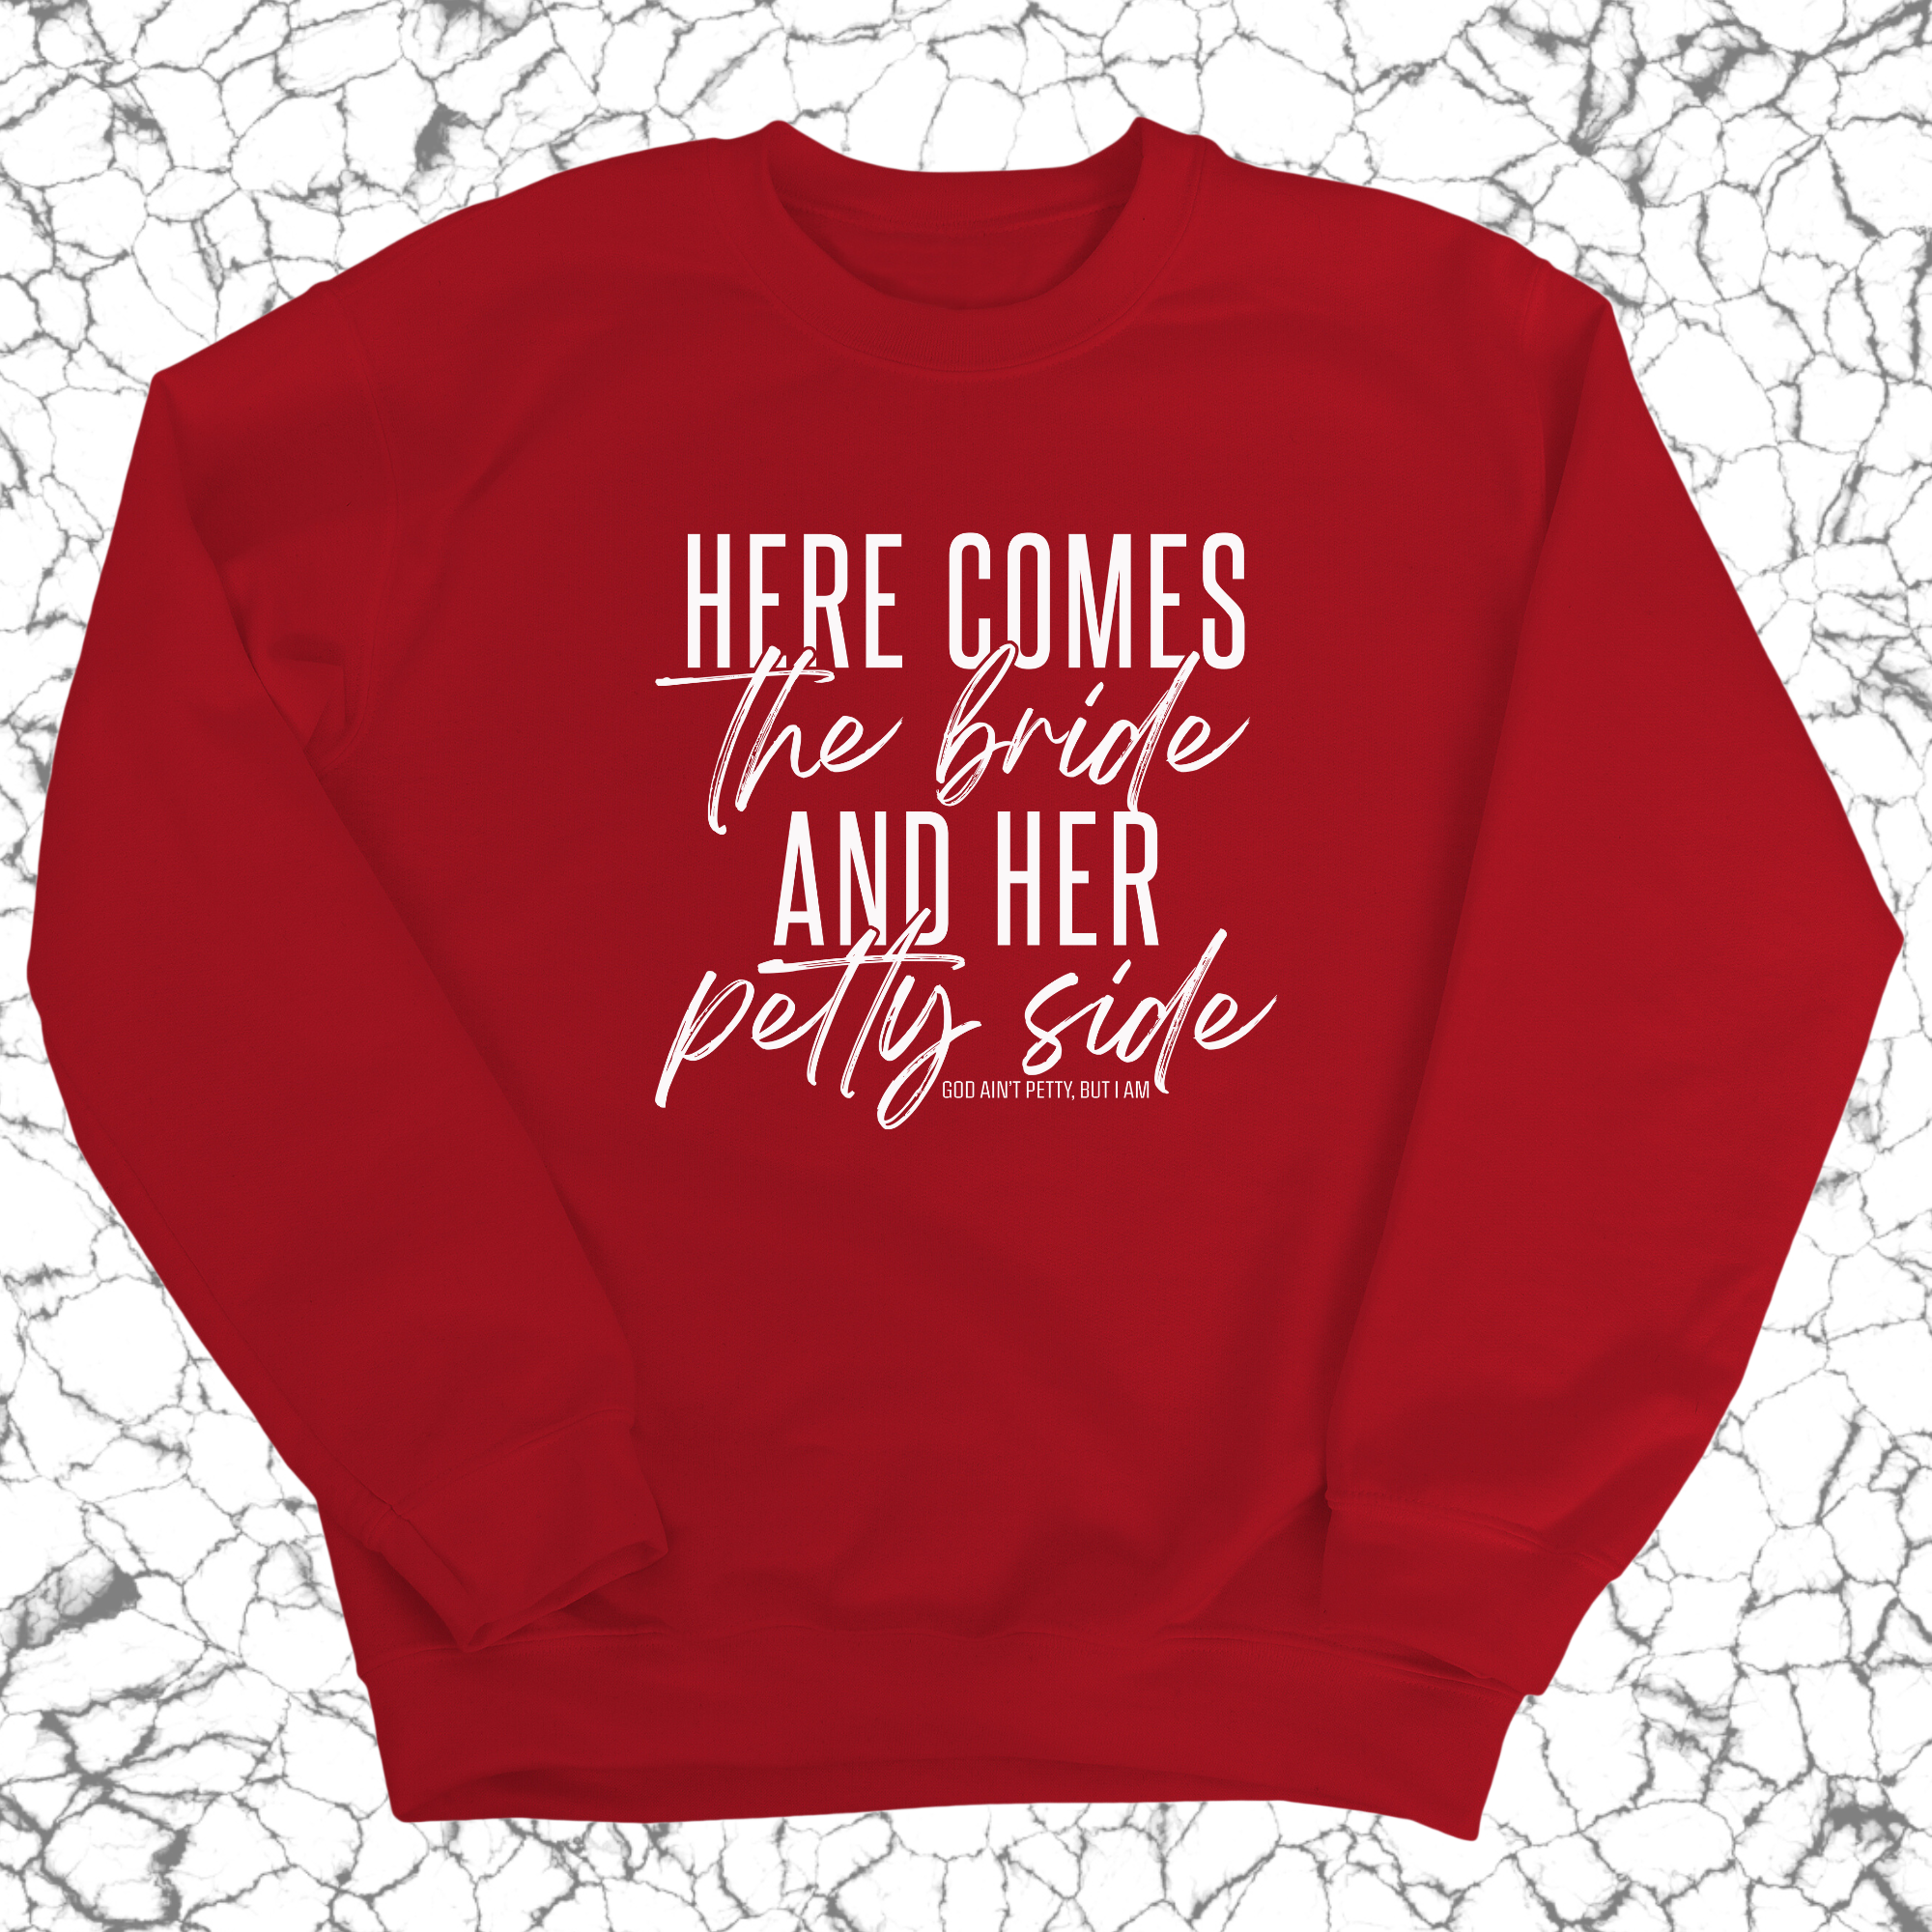 Here comes the bride and her Petty side Unisex Sweatshirt-Sweatshirt-The Original God Ain't Petty But I Am